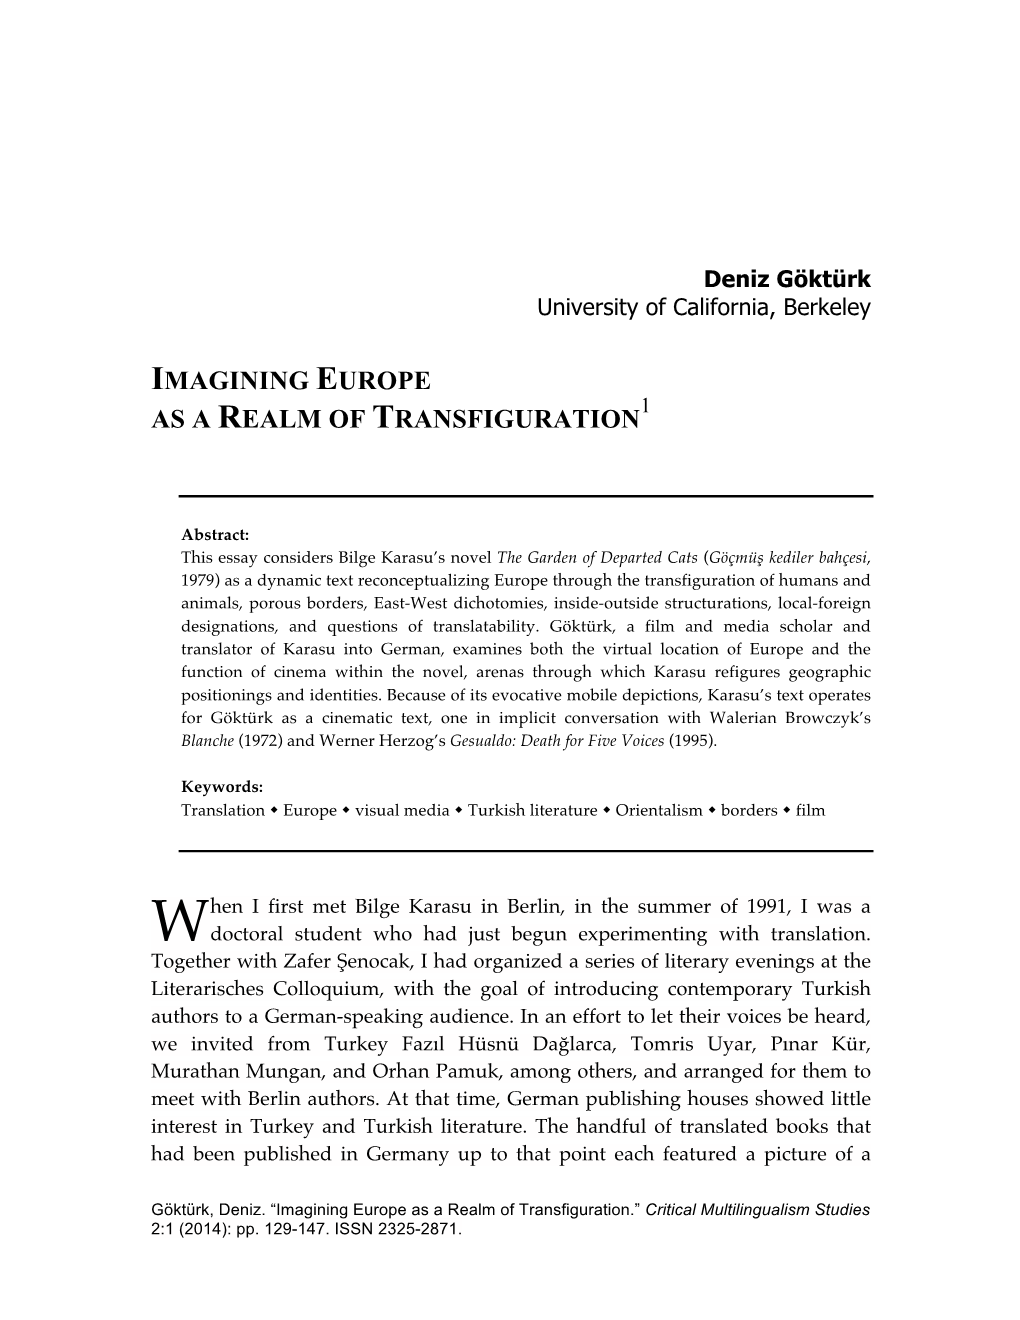 Imagining Europe As a Realm of Transfiguration.” Critical Multilingualism Studies 2:1 (2014): Pp